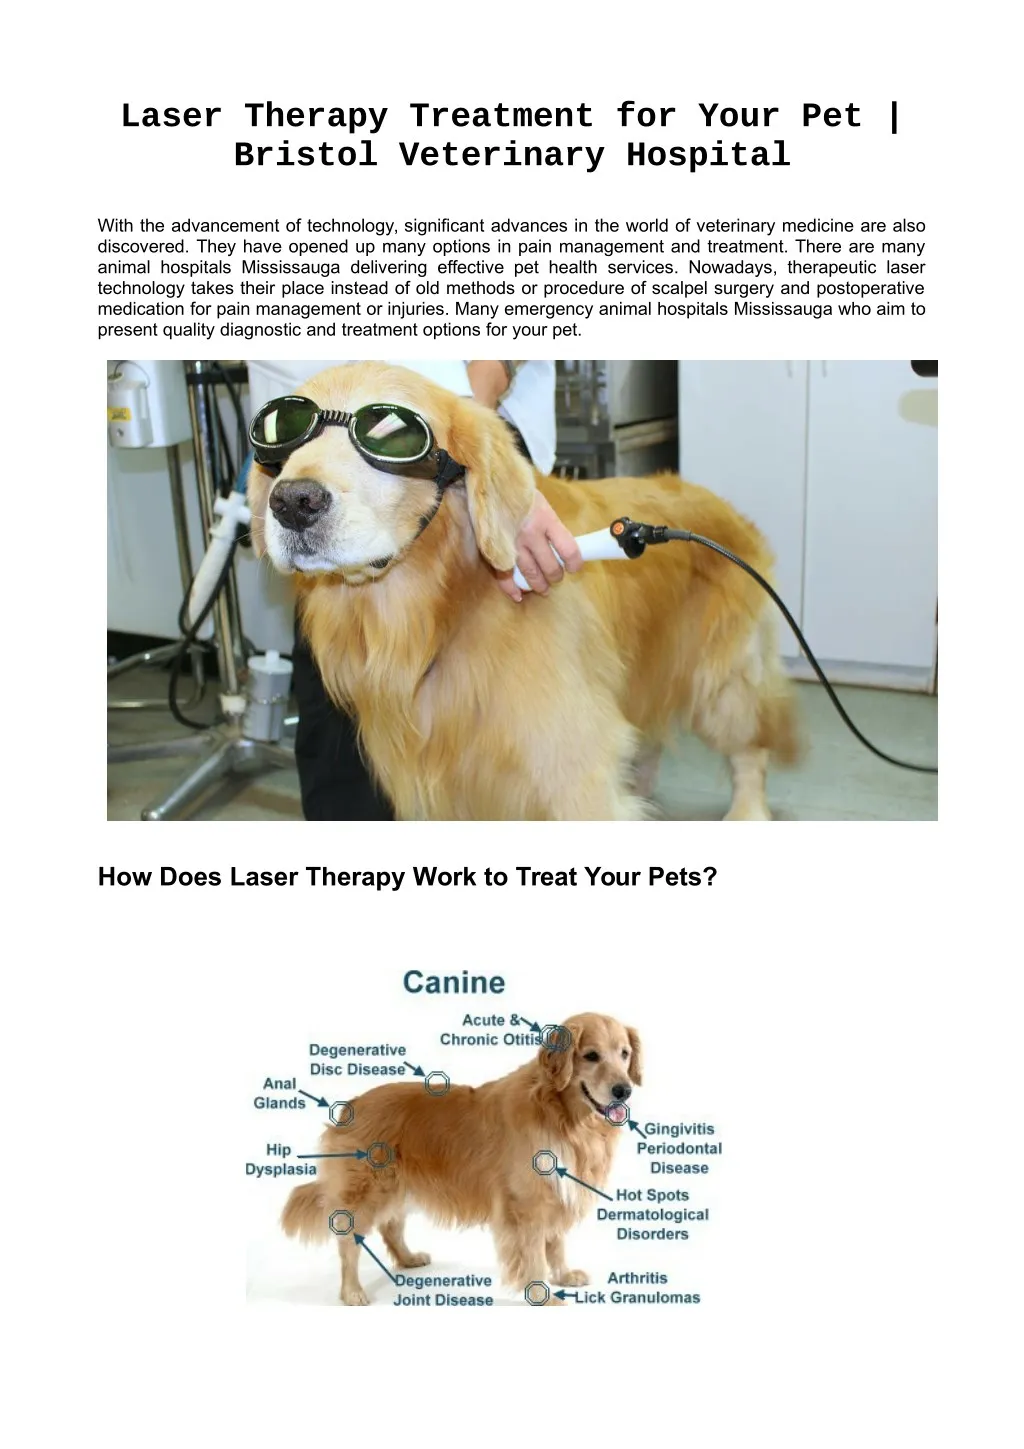 laser therapy treatment for your pet bristol